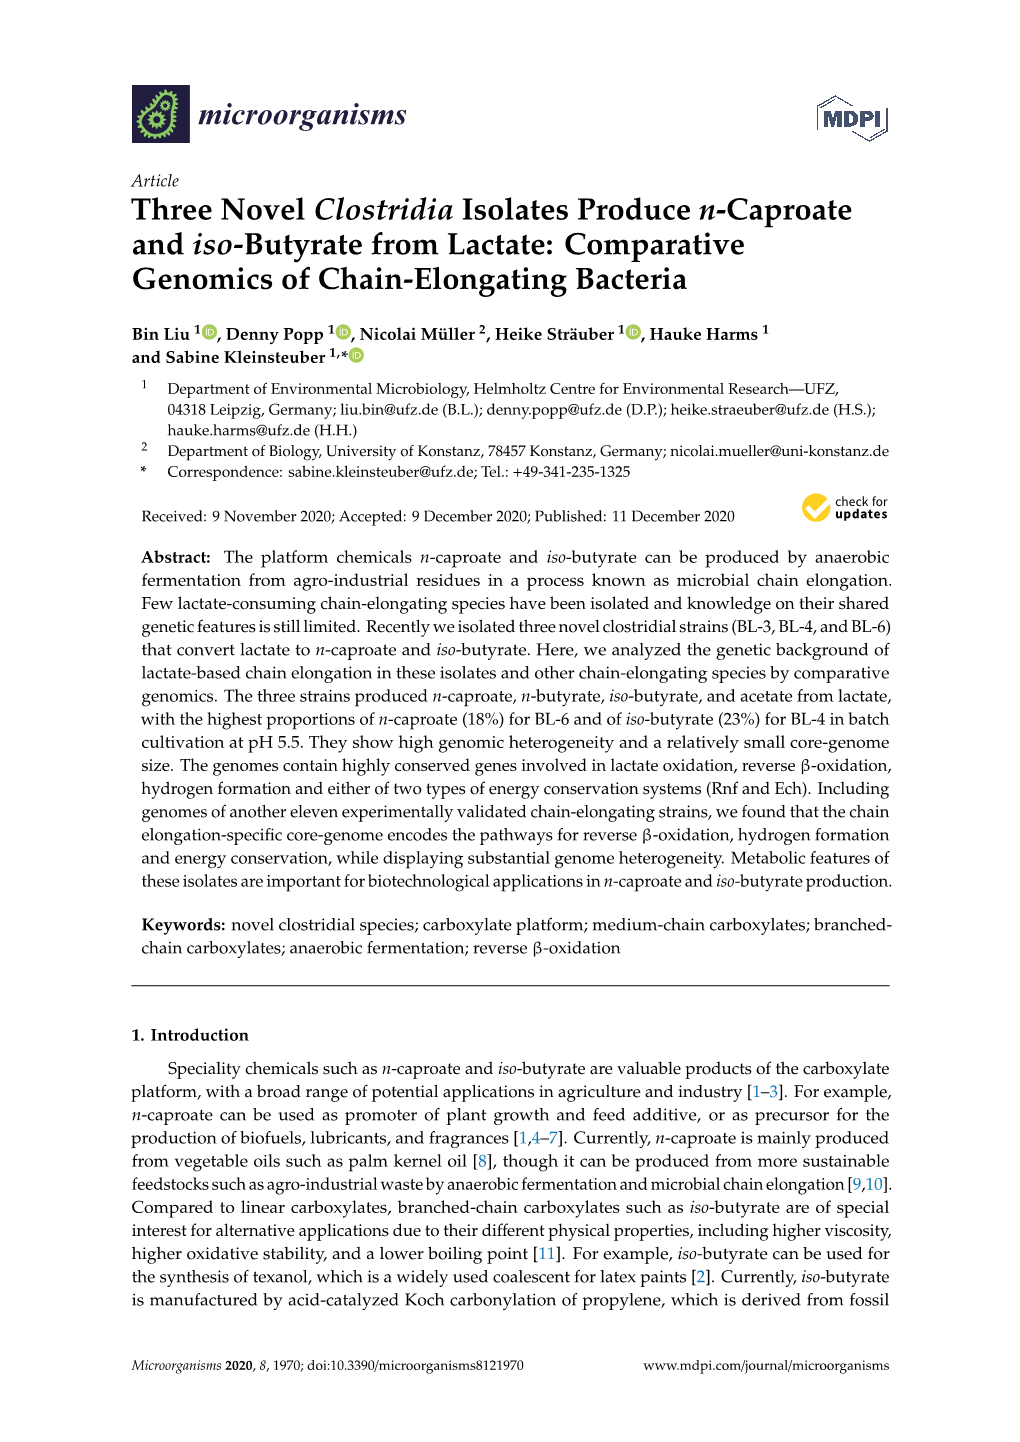 Three Novel Clostridia Isolates Produce N-Caproate and Iso-Butyrate from Lactate: Comparative Genomics of Chain-Elongating Bacteria